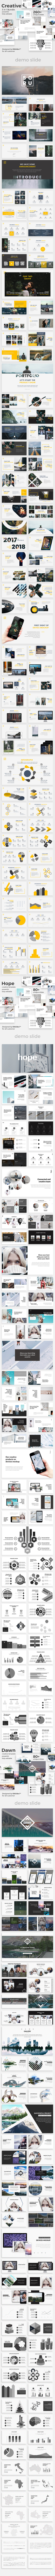 GraphicRiver 3 in 1 Creative Bundle Powerpoint Template 20952629